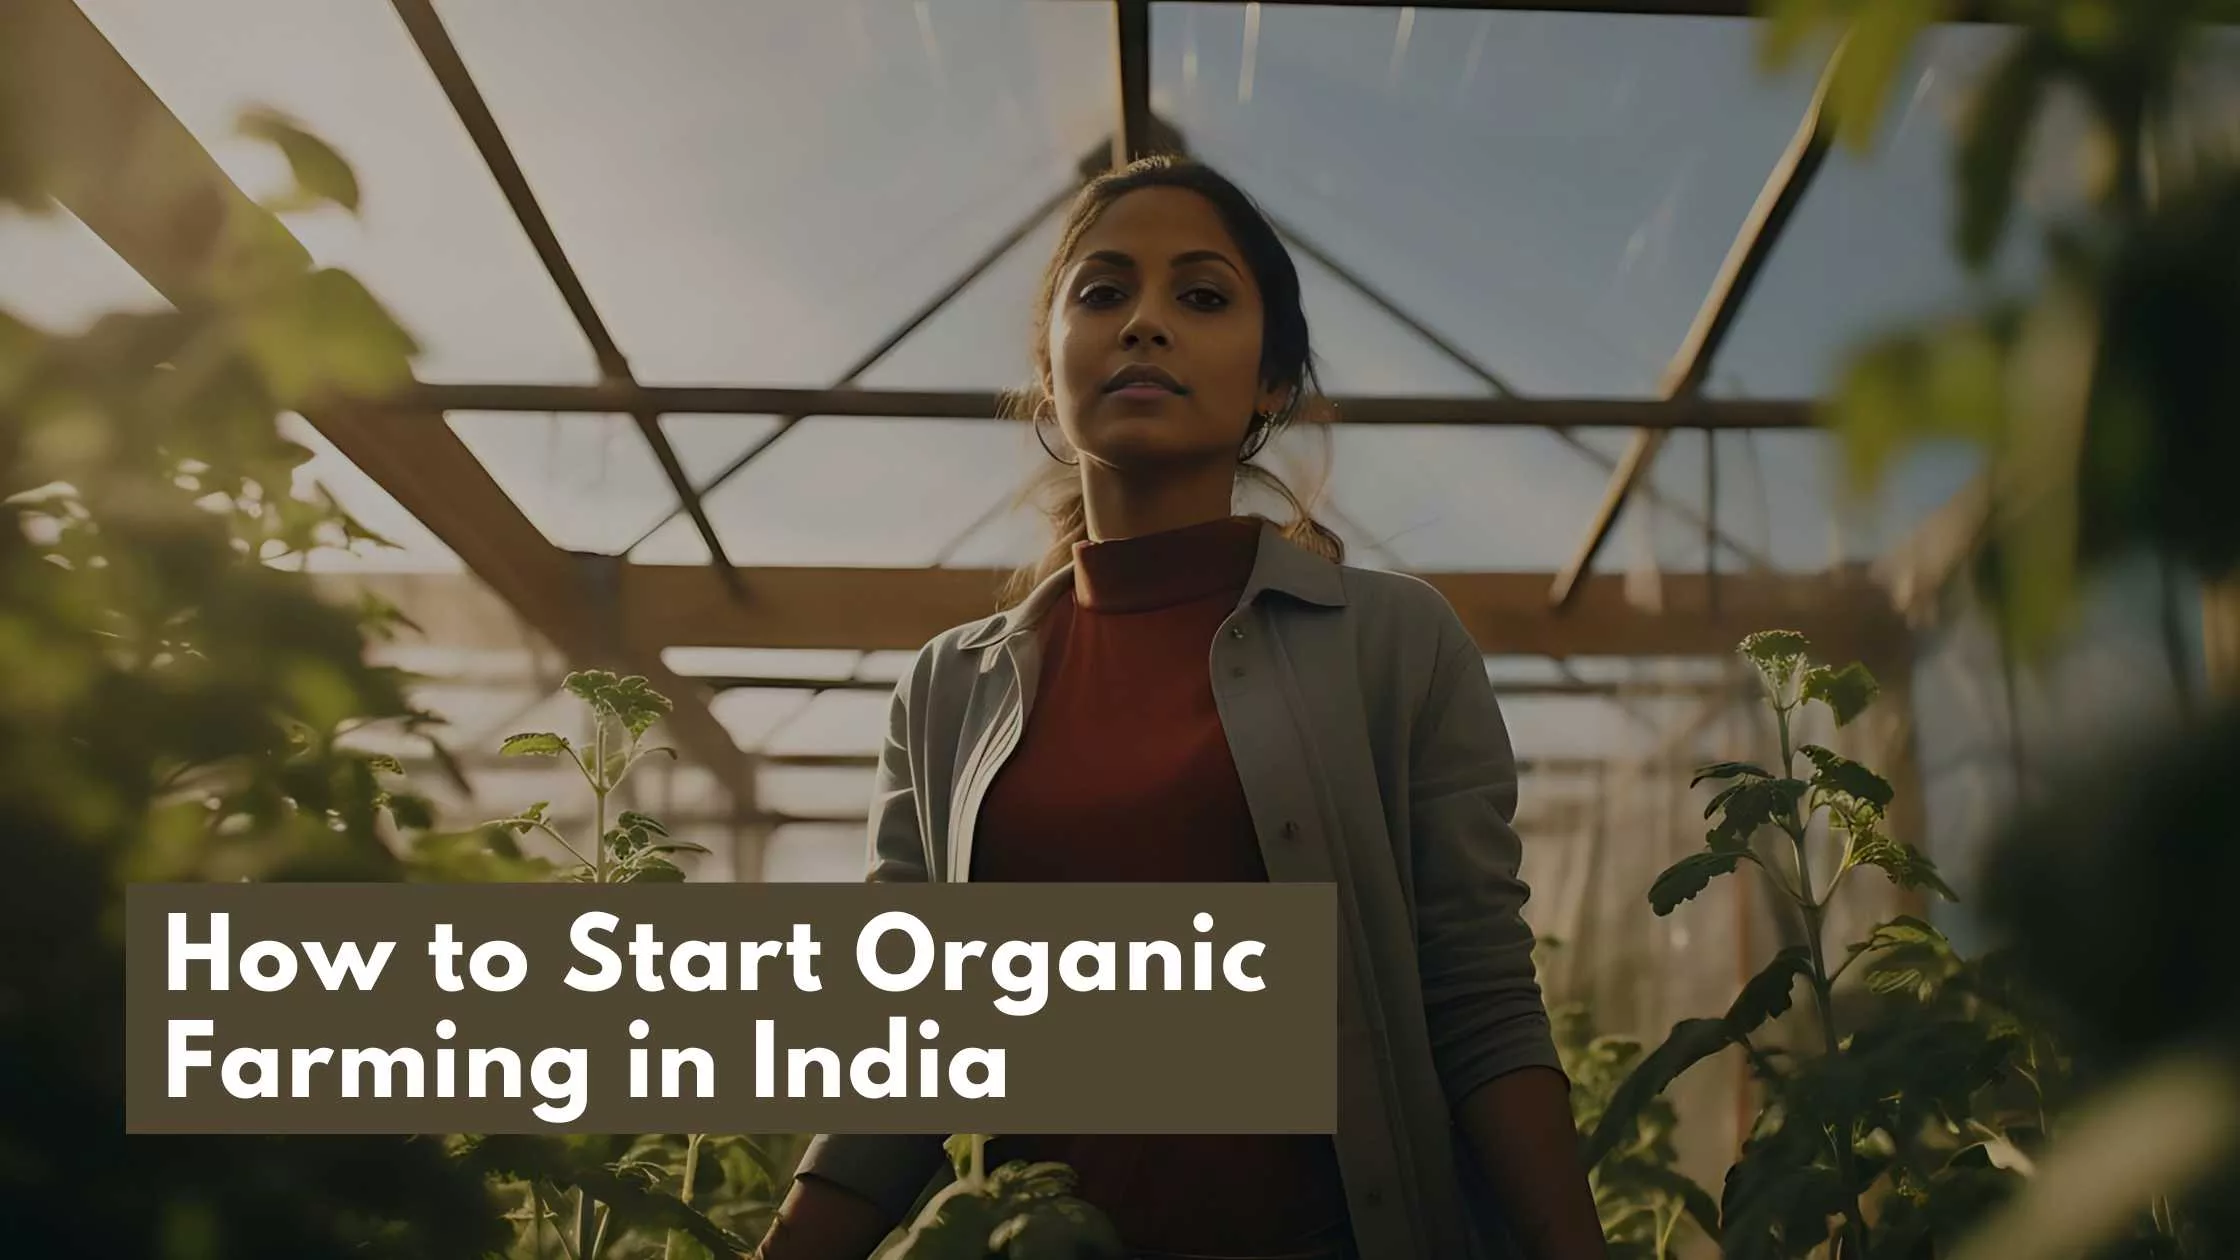 How to Start Organic Farming in India